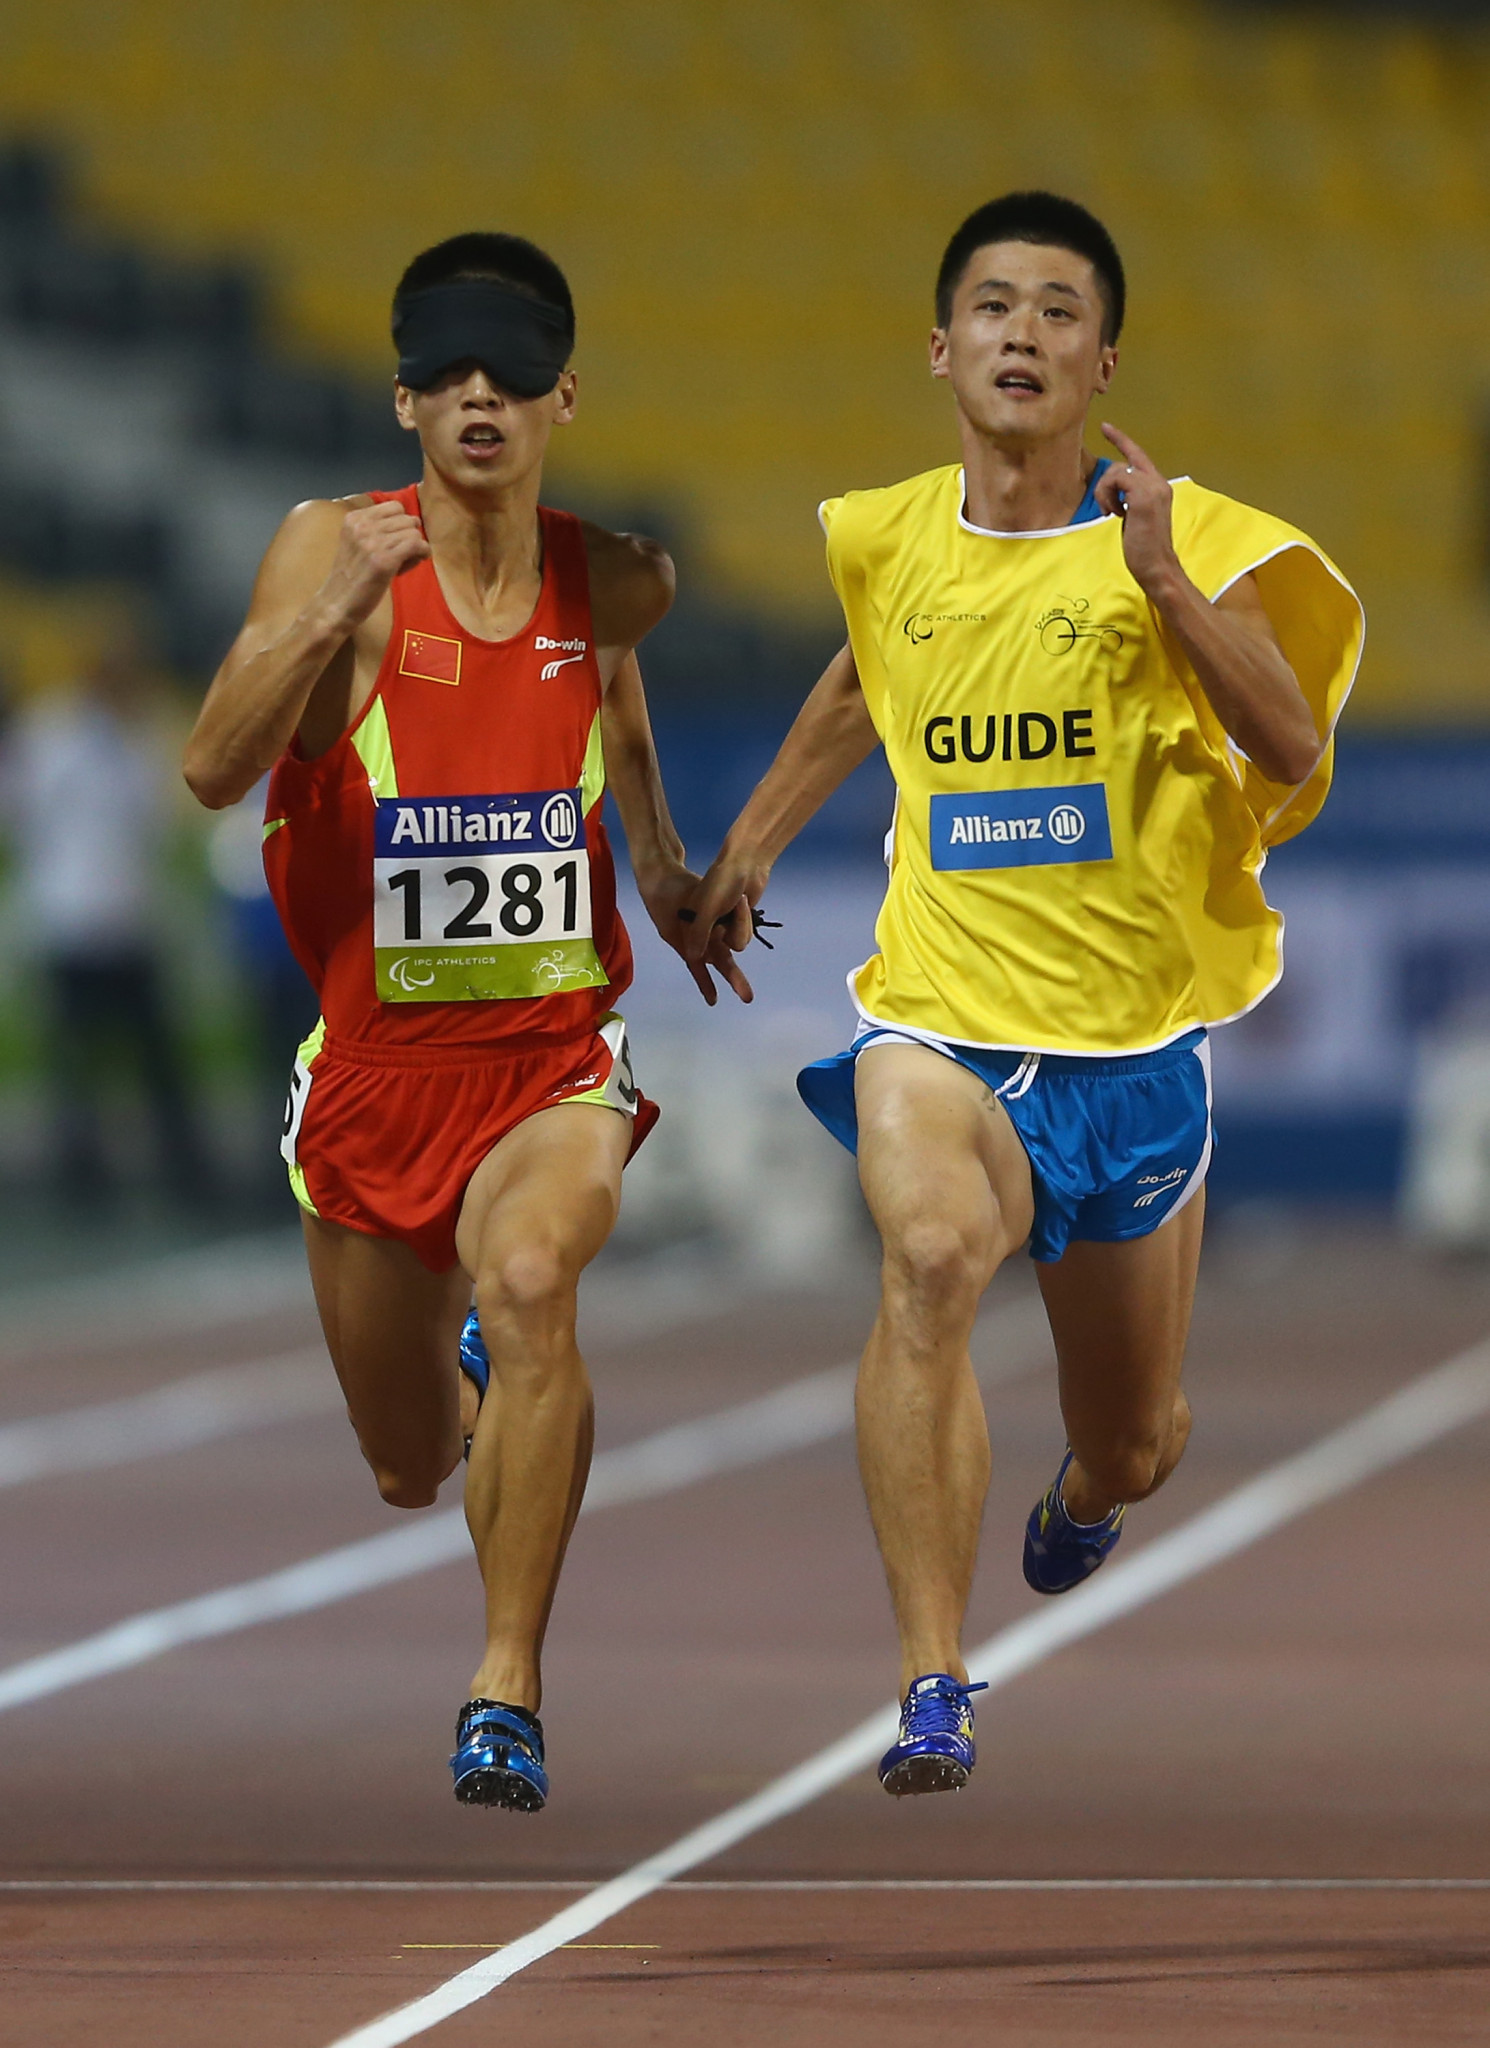 China's Dongdong di, pictured with guide, the triple Asian Games champion, won gold on day one of the World Para Athletics Grand Prix in Beijing ©Getty Images